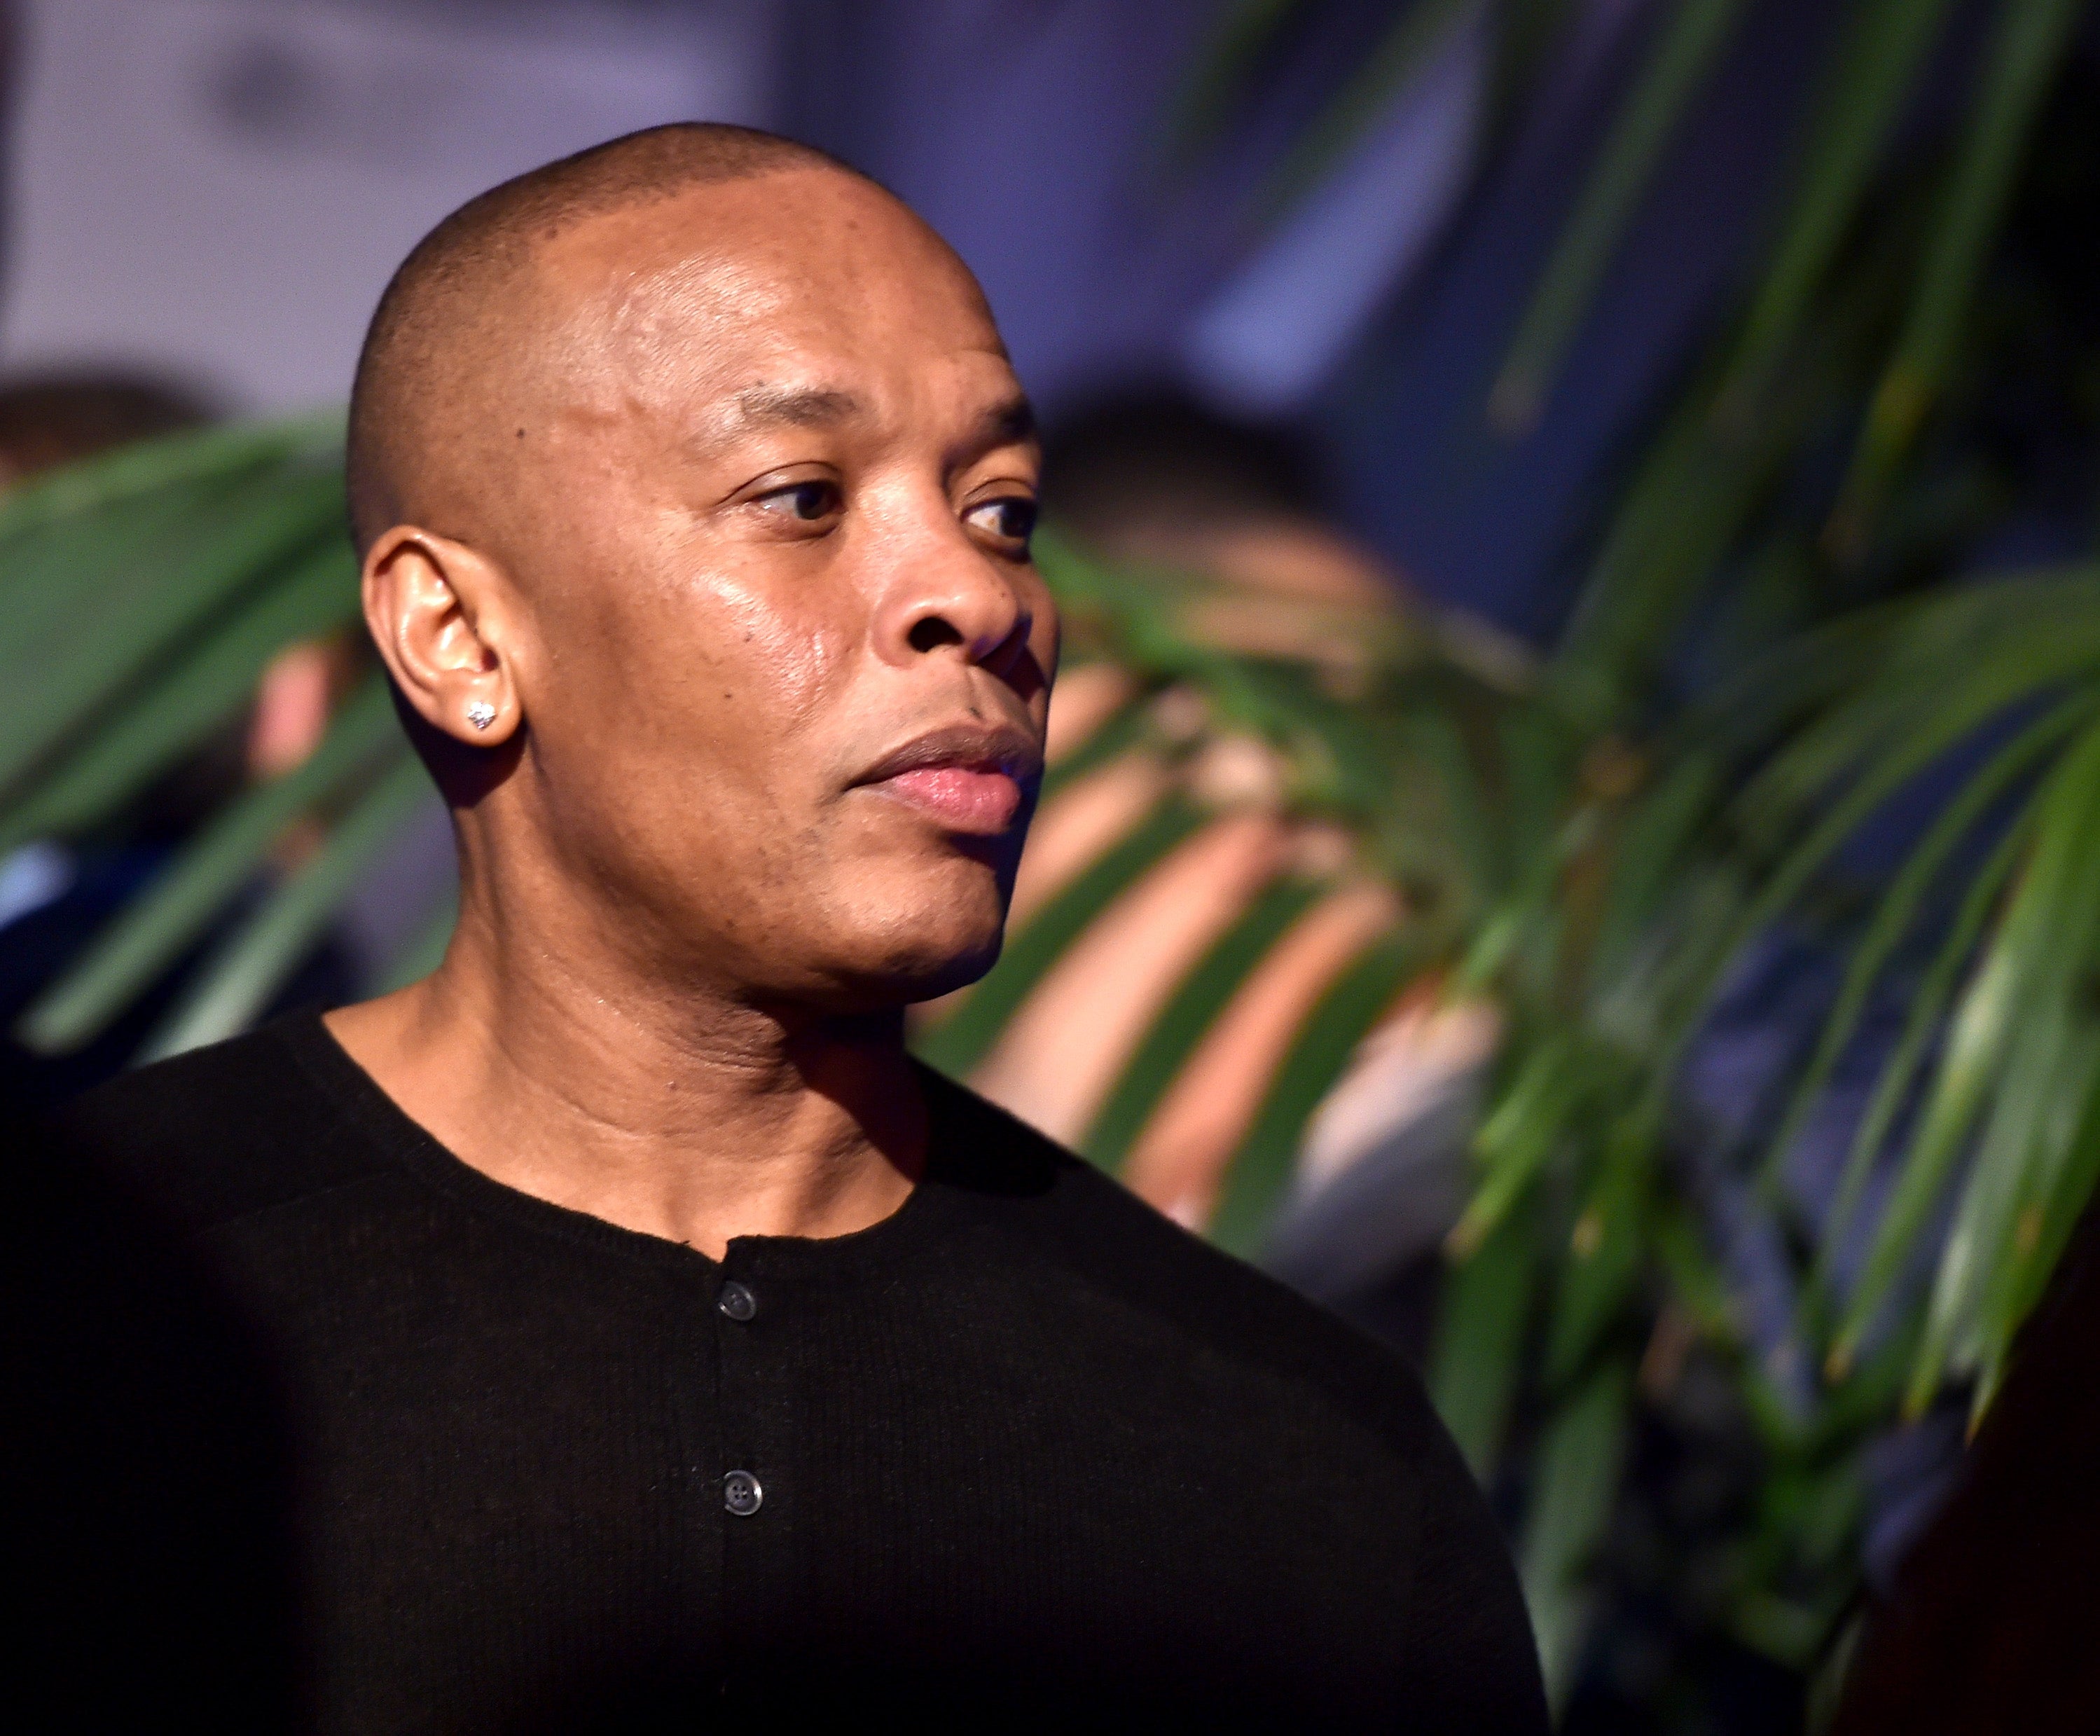 Dr Dre discharged from hospital and back in the studio following brain aneurysm.